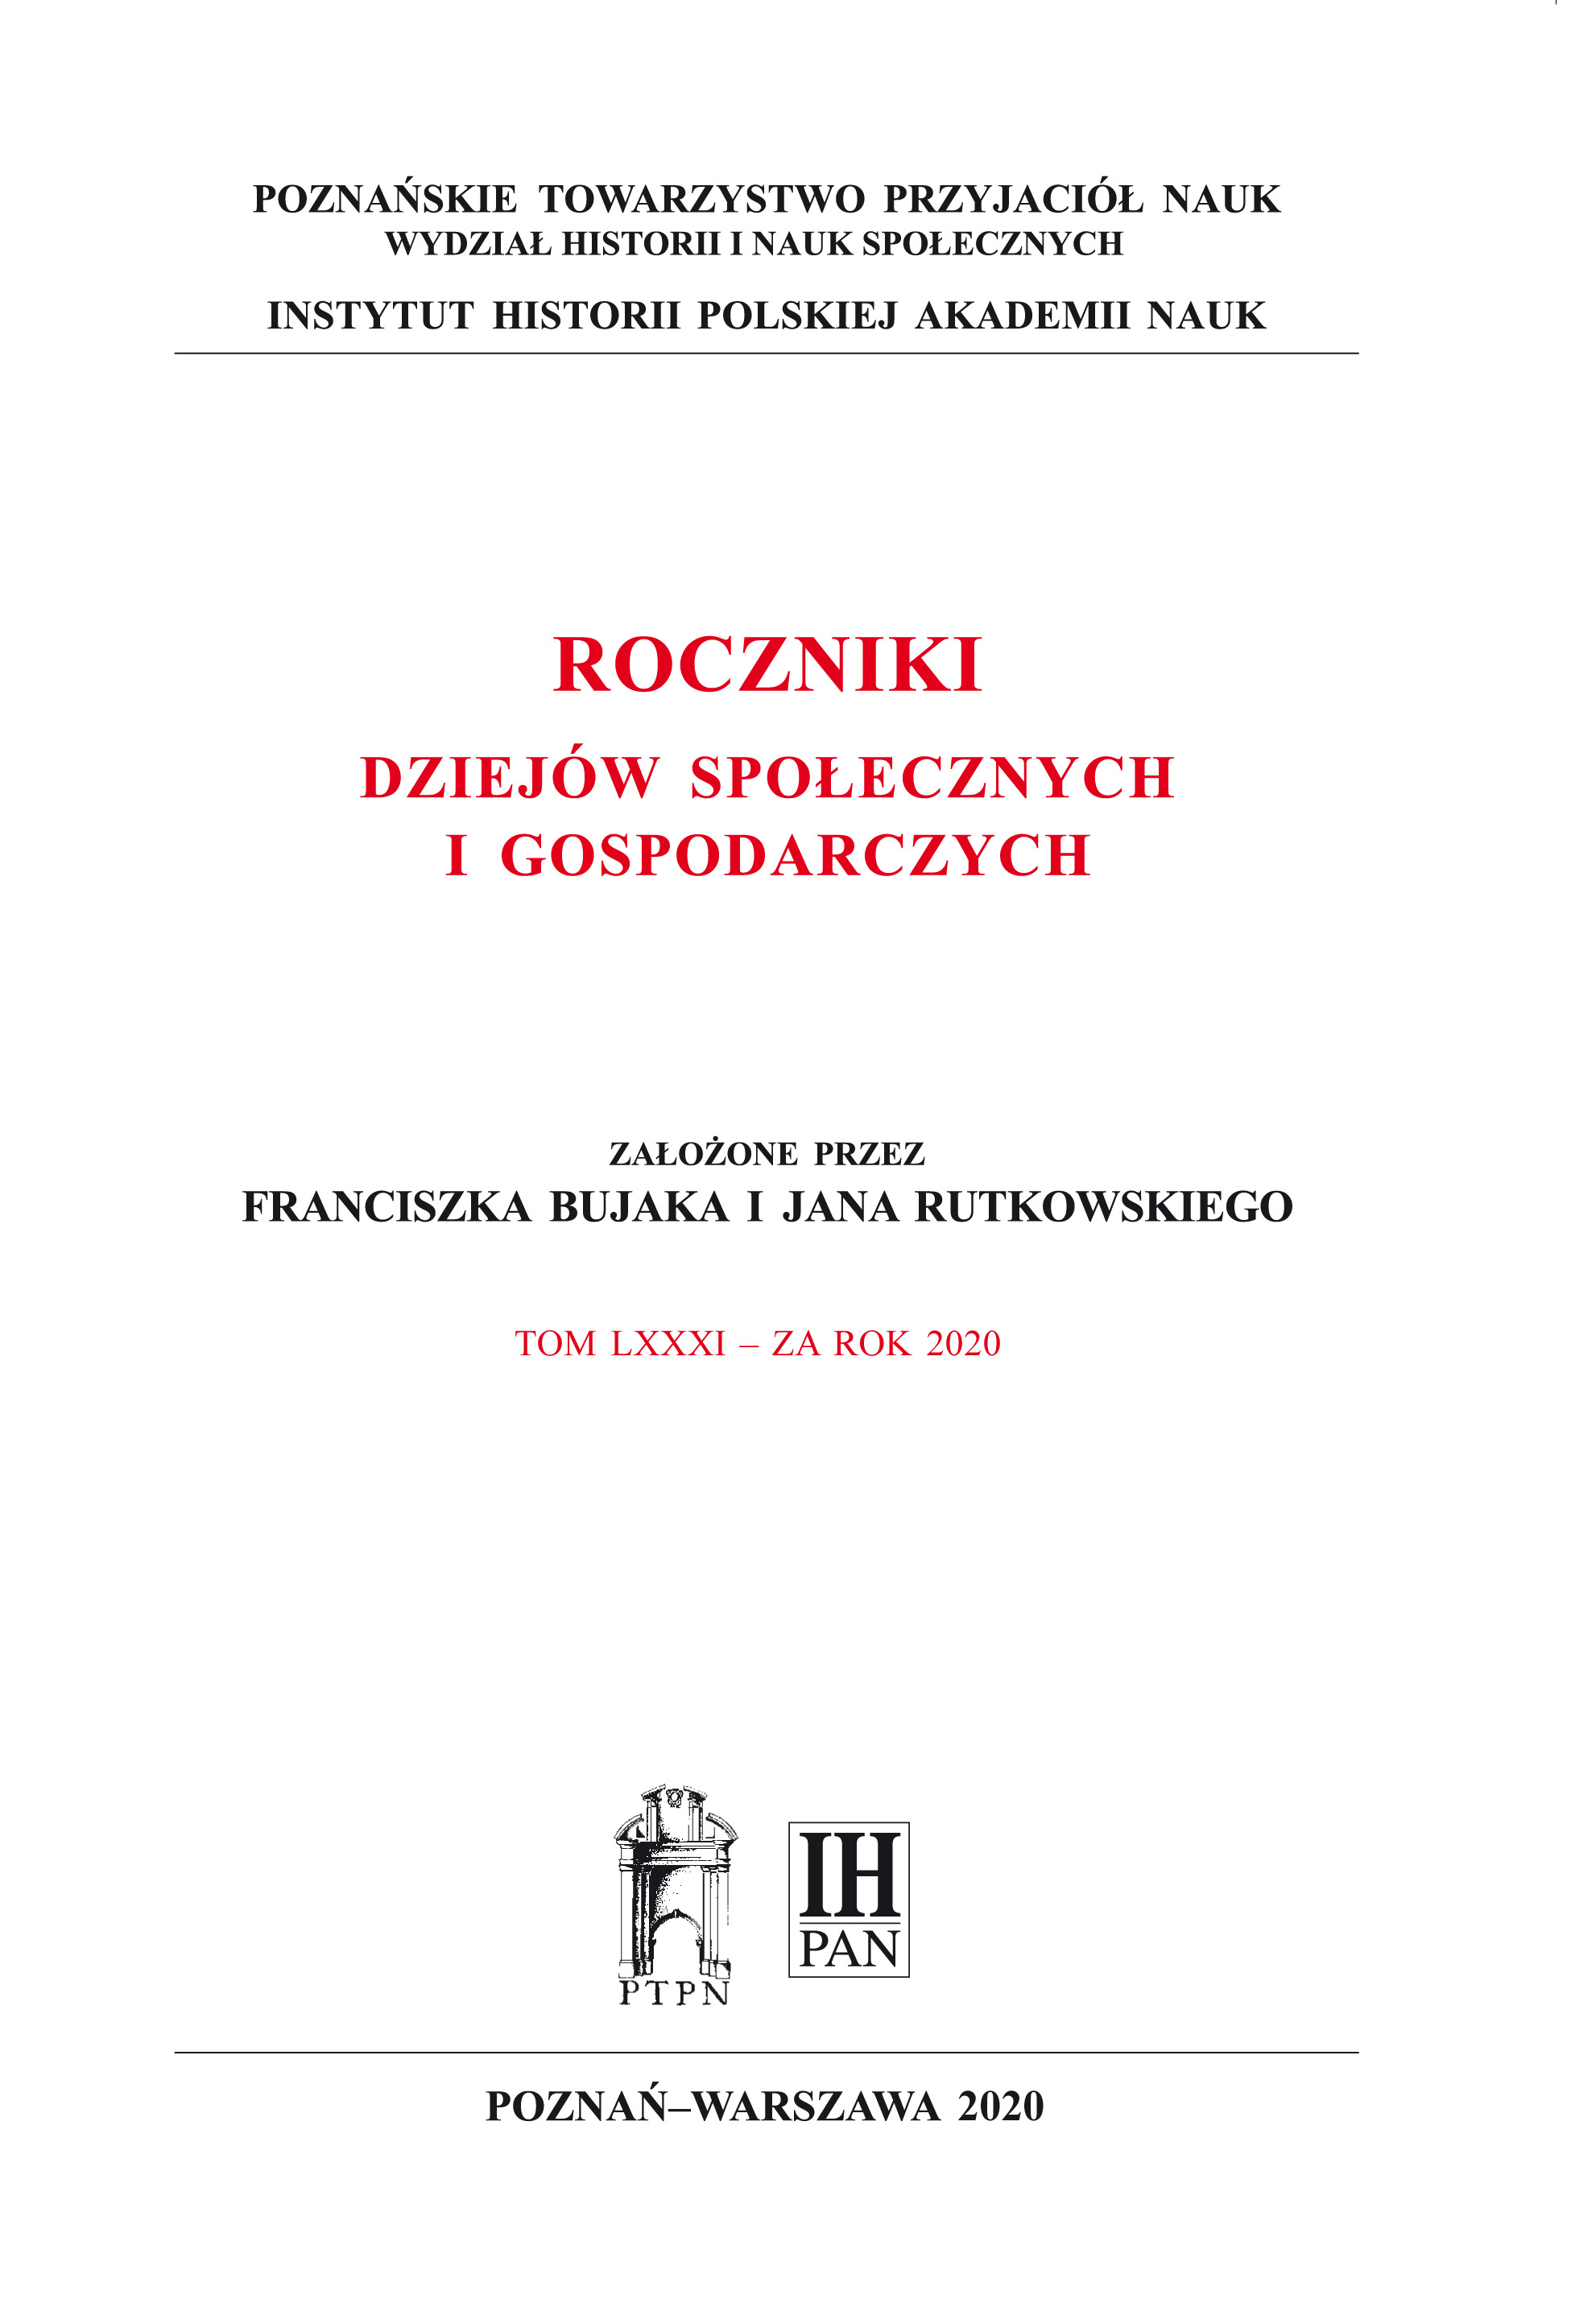 Benefits for the Prussian army by the inhabitants of the Grand Duchy of Poznań between 1815–1844. State of research and research perspectives Cover Image